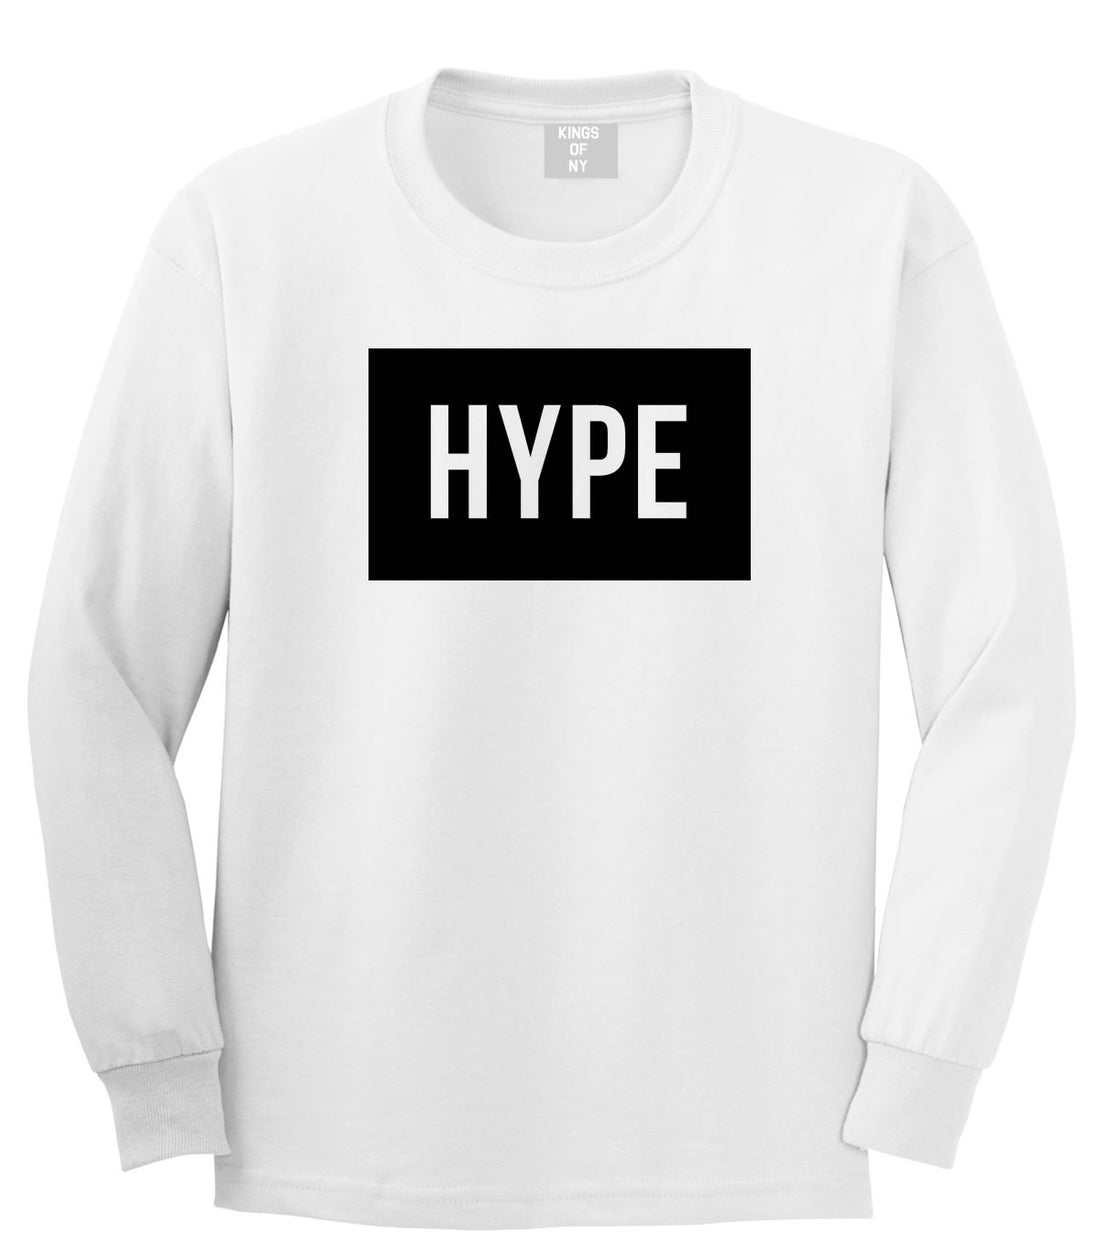 Hype Style Streetwear Brand Logo White by Kings Of NY Long Sleeve T-Shirt in White by Kings Of NY